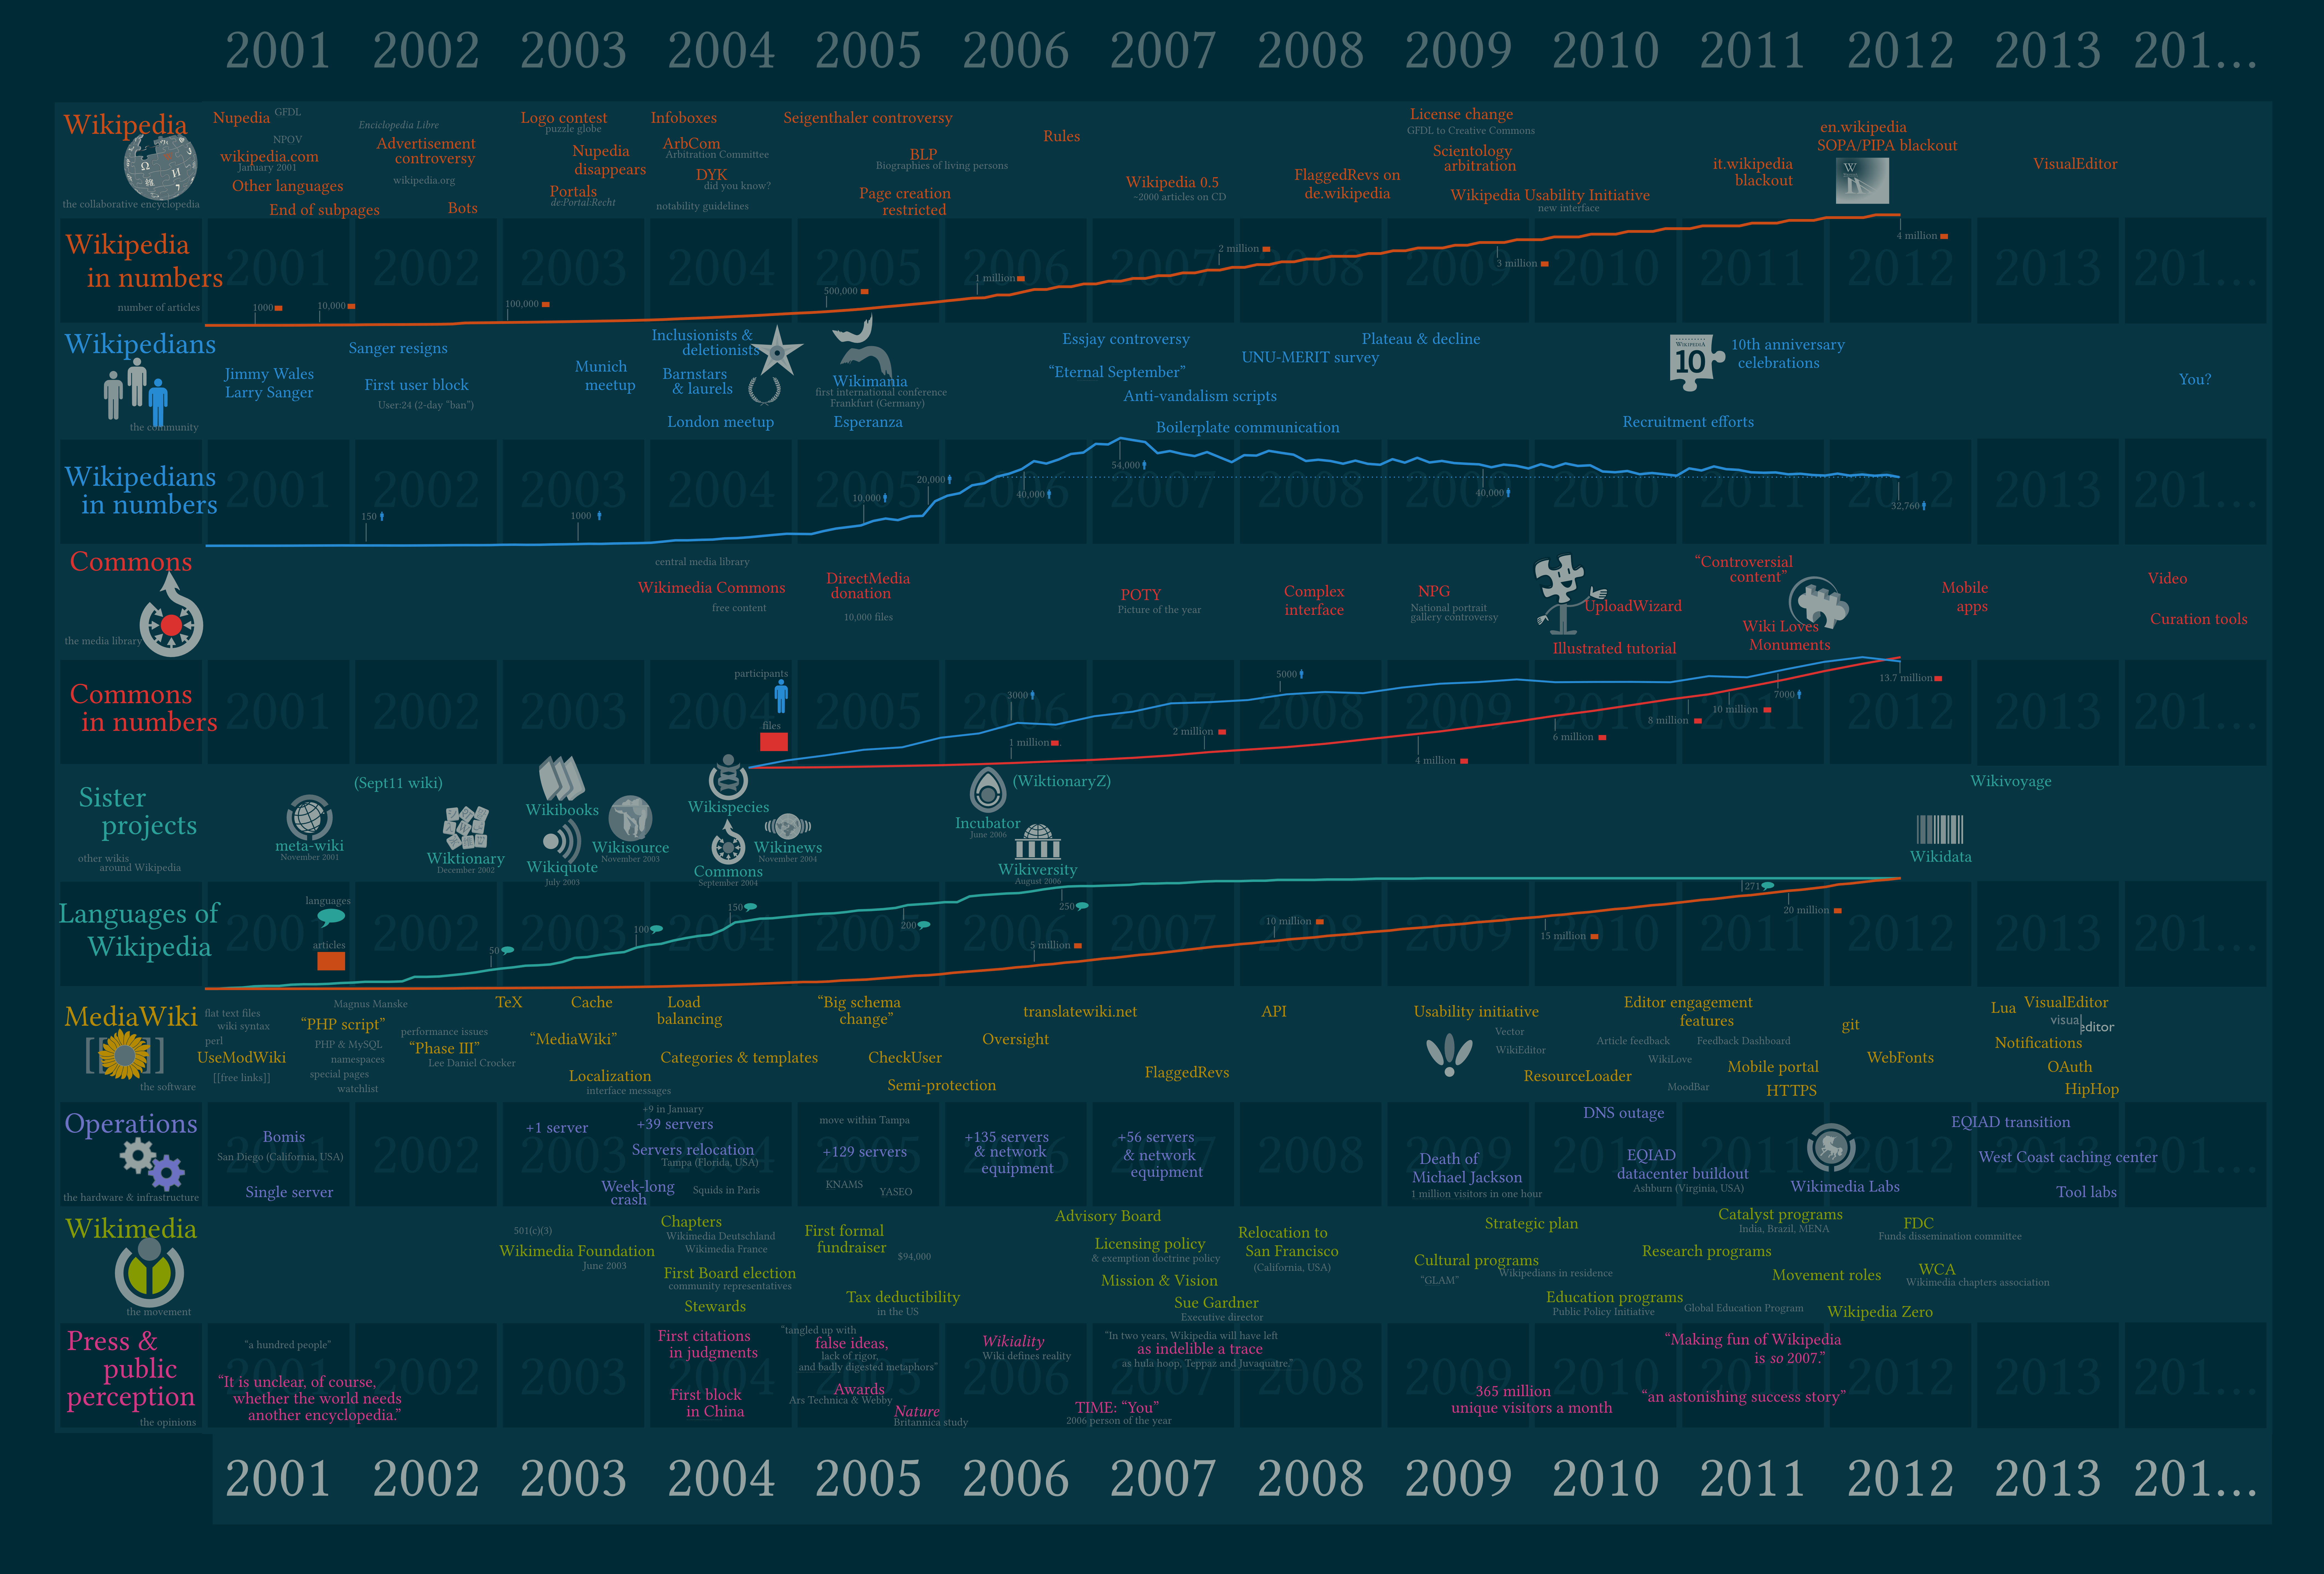 /images/2012-06-25_Wikipedia-infographic.png